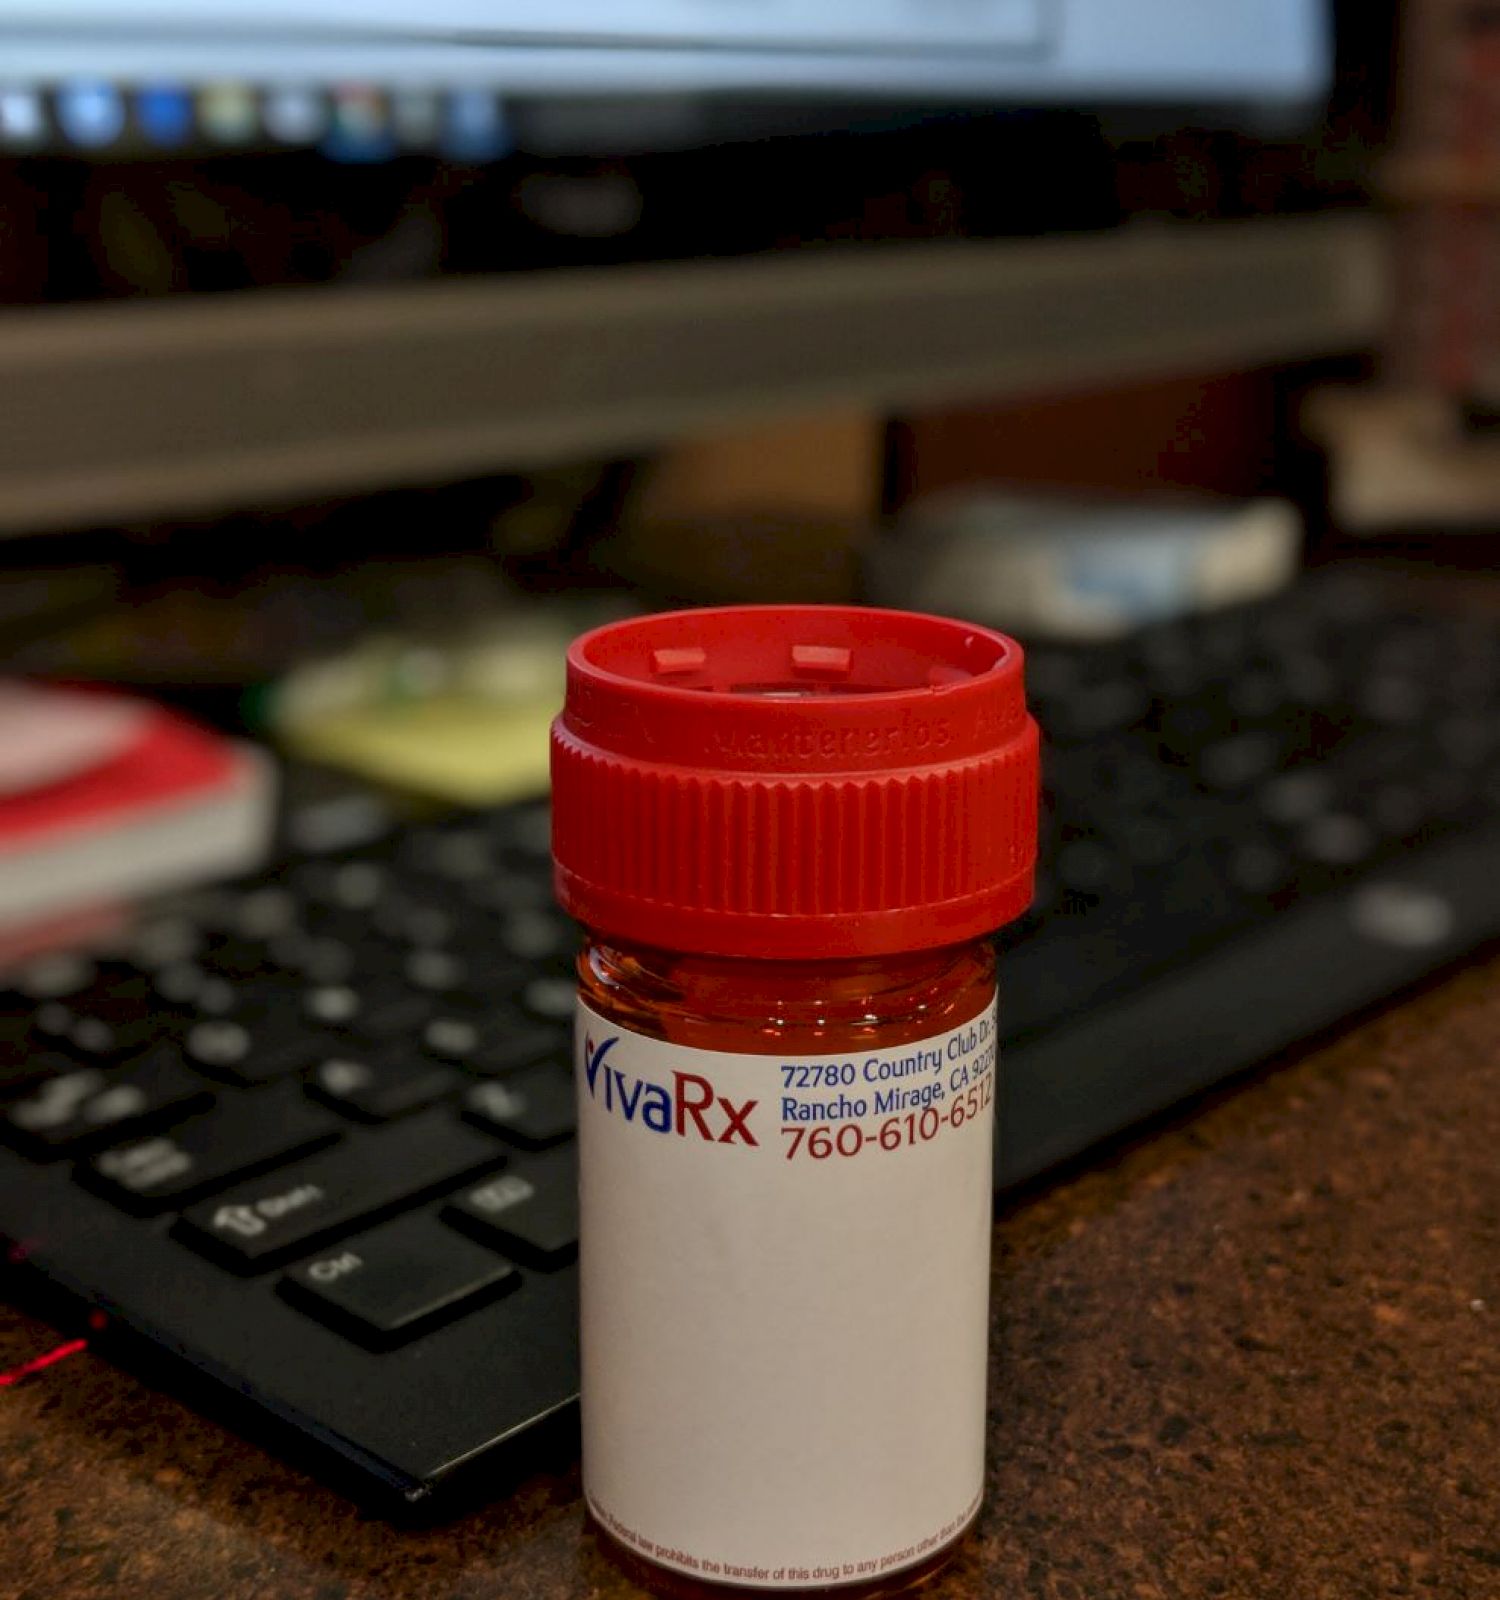 A small prescription bottle with a red cap is placed in front of a keyboard and computer screen on a desk.